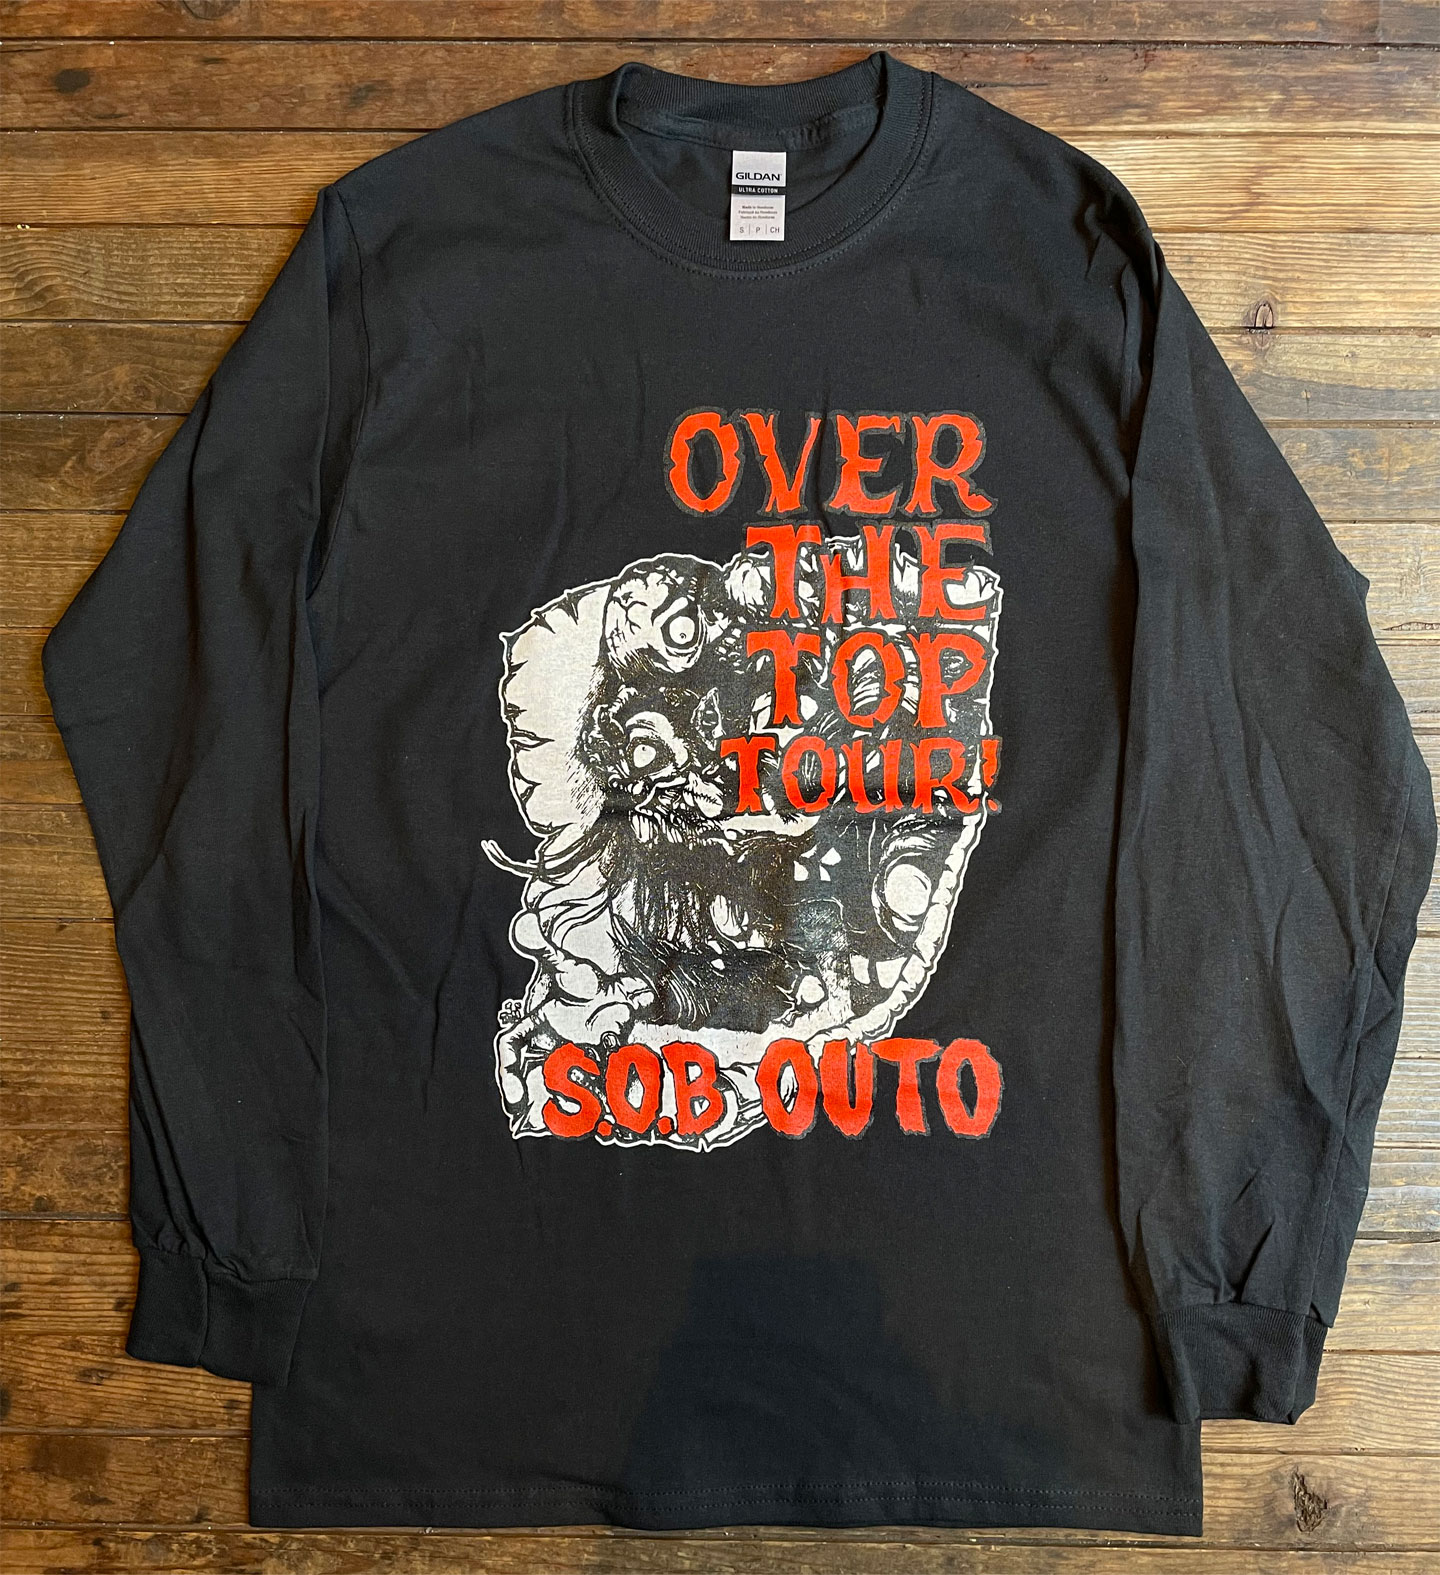 S.O.B x OUTO ロングスリーブTシャツ OVER THE TOP TOUR | 45REVOLUTION